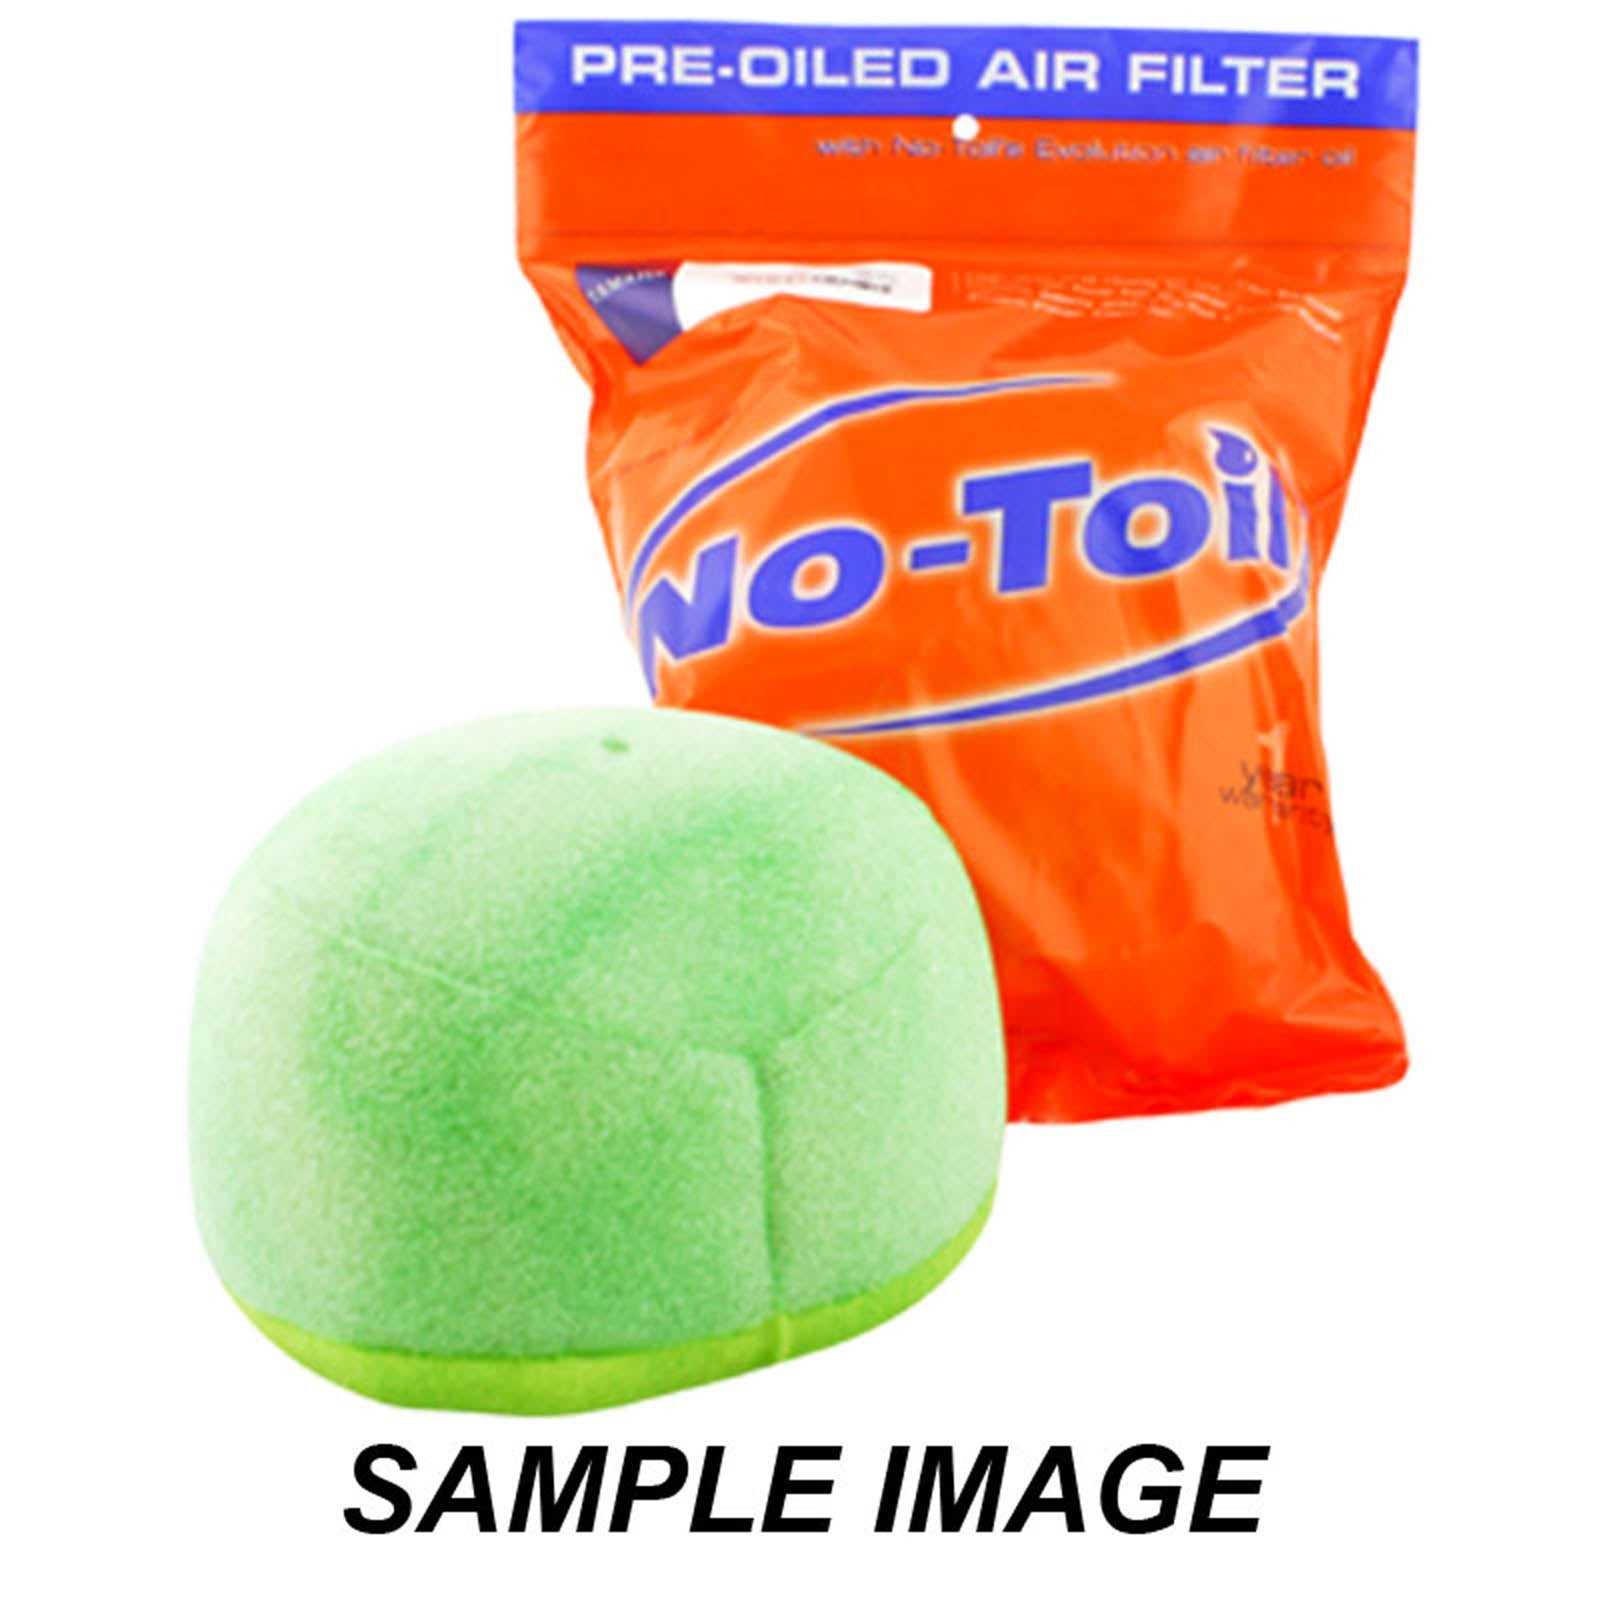 No-Toil, PRE-OILED FILTER HON CRF450R 13-16